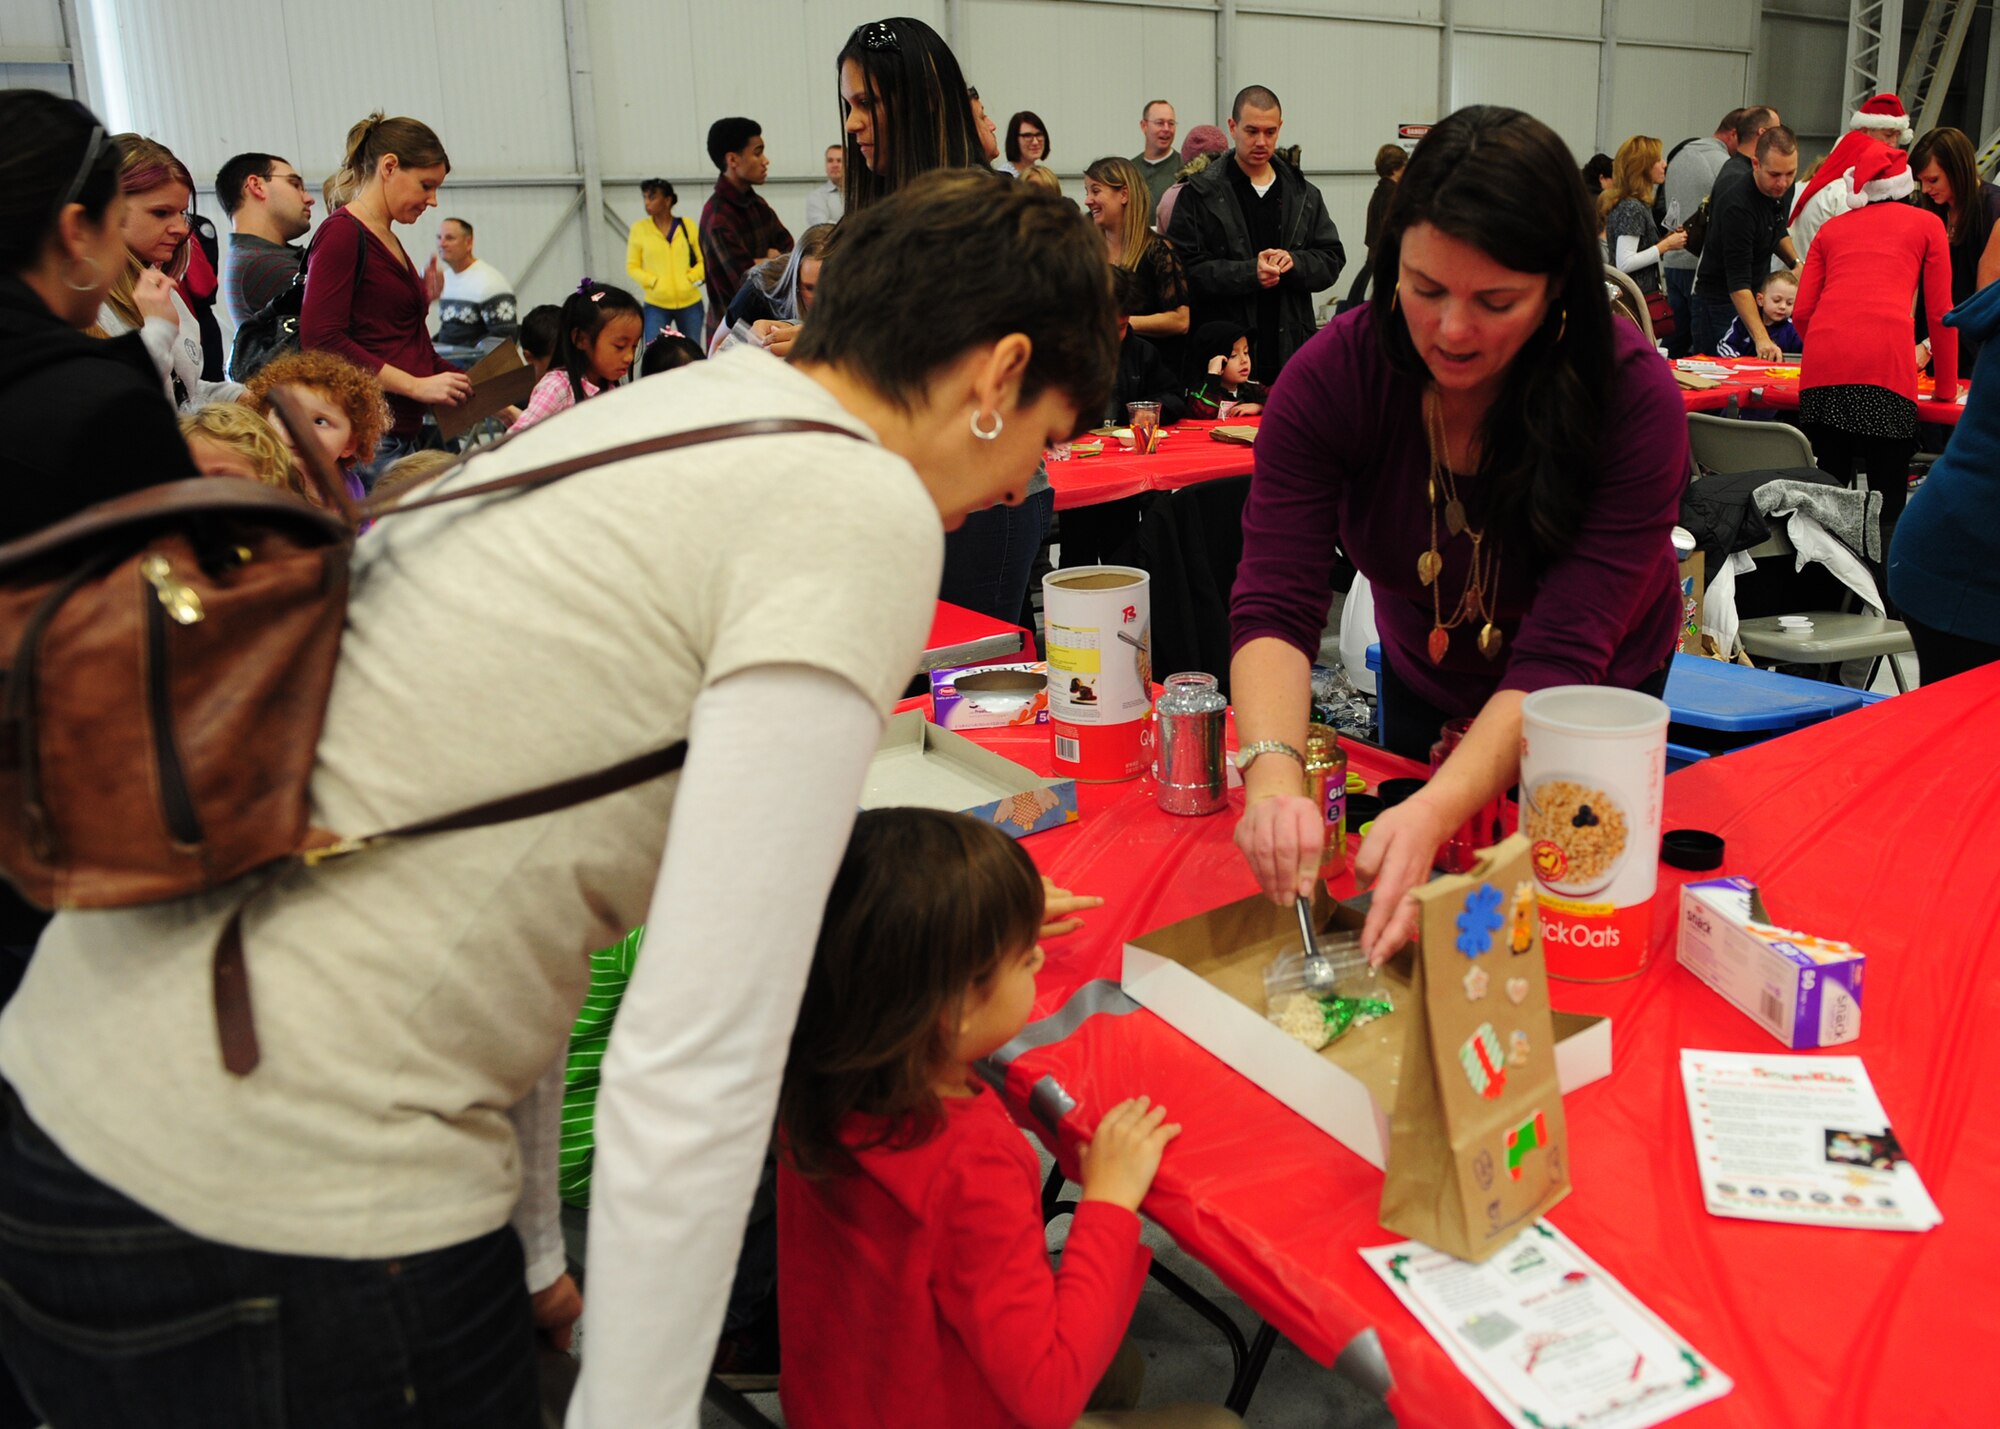 Volunteers from Beale’s Enlisted Spouses Club help with crafts during the Children’s Holiday Party at Beale Air Force Base, Calif., Dec. 8, 2012. More than 75 volunteers from Beale and the surrounding community provided face painting, pictures, crafts and food while the Wheatland High School Band played holiday music throughout the event. (U.S. Air Force photo by Senior Airman Shawn Nickel/Released)